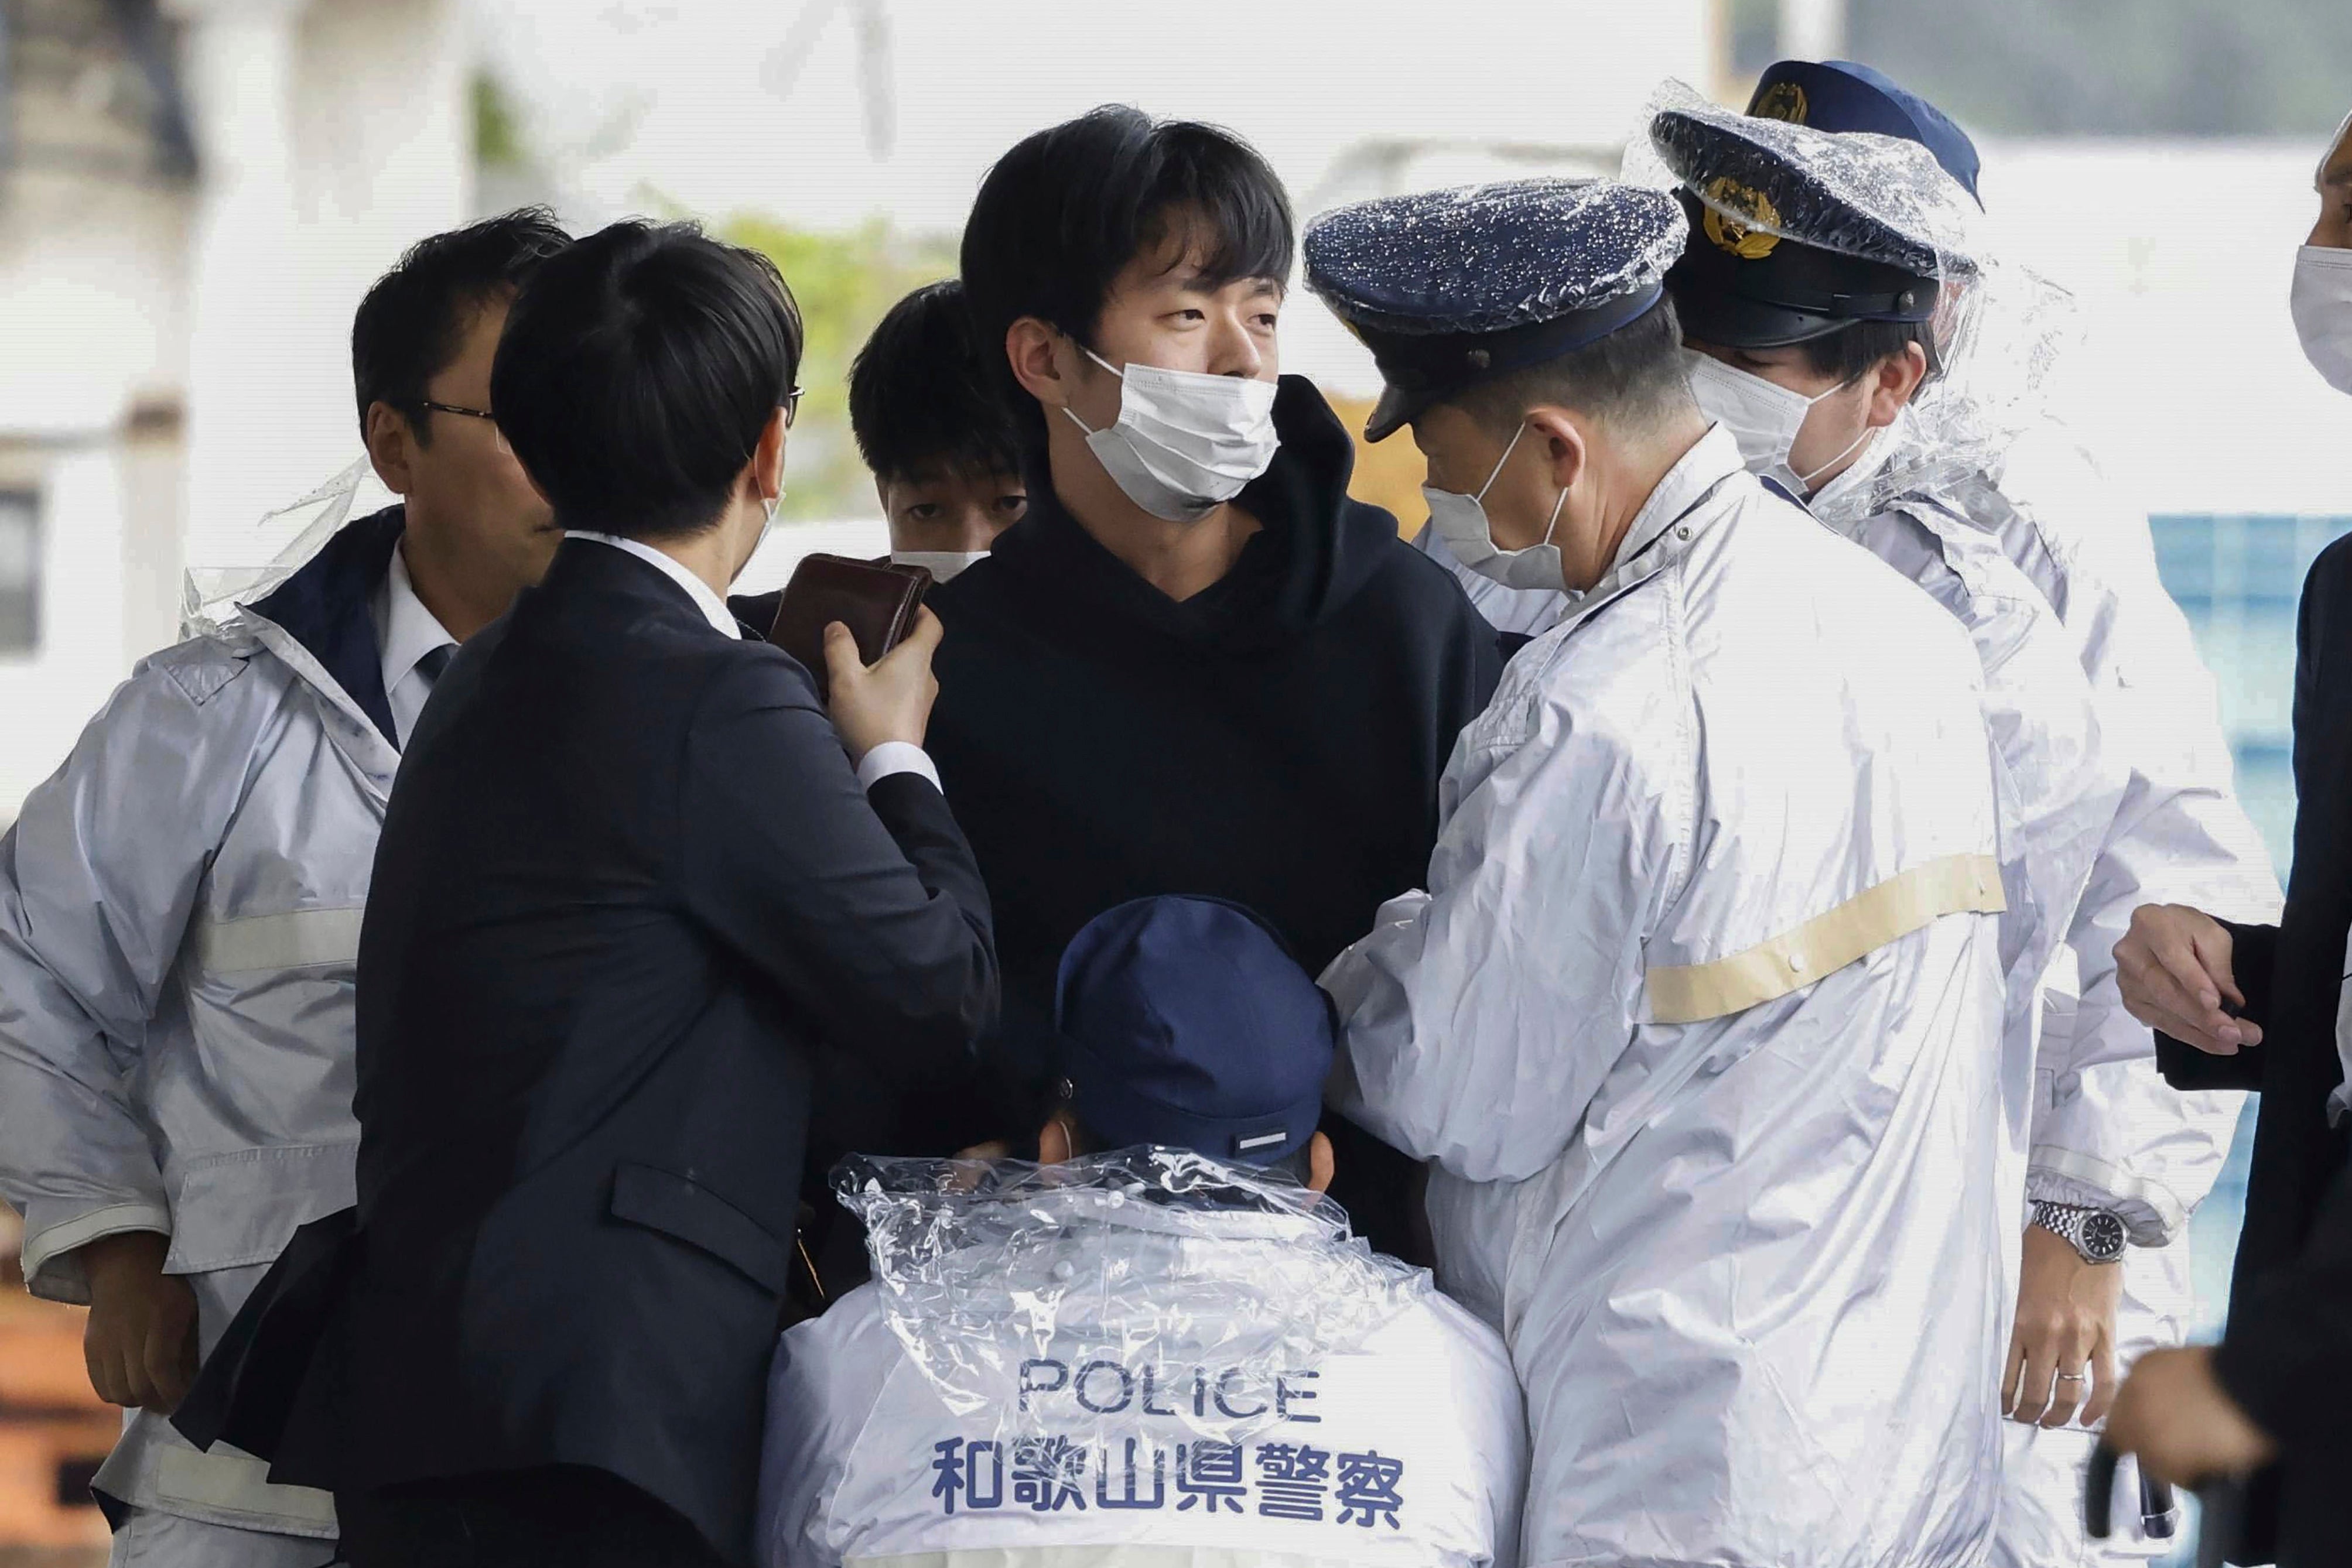 File photo: A man who identified as Ryuji Kimura arrested after what appeared to be a pipe bomb was thrown at Japanese prime minister Fumio Kishida during his visit at a port in Wakayama, western Japan on 15 April